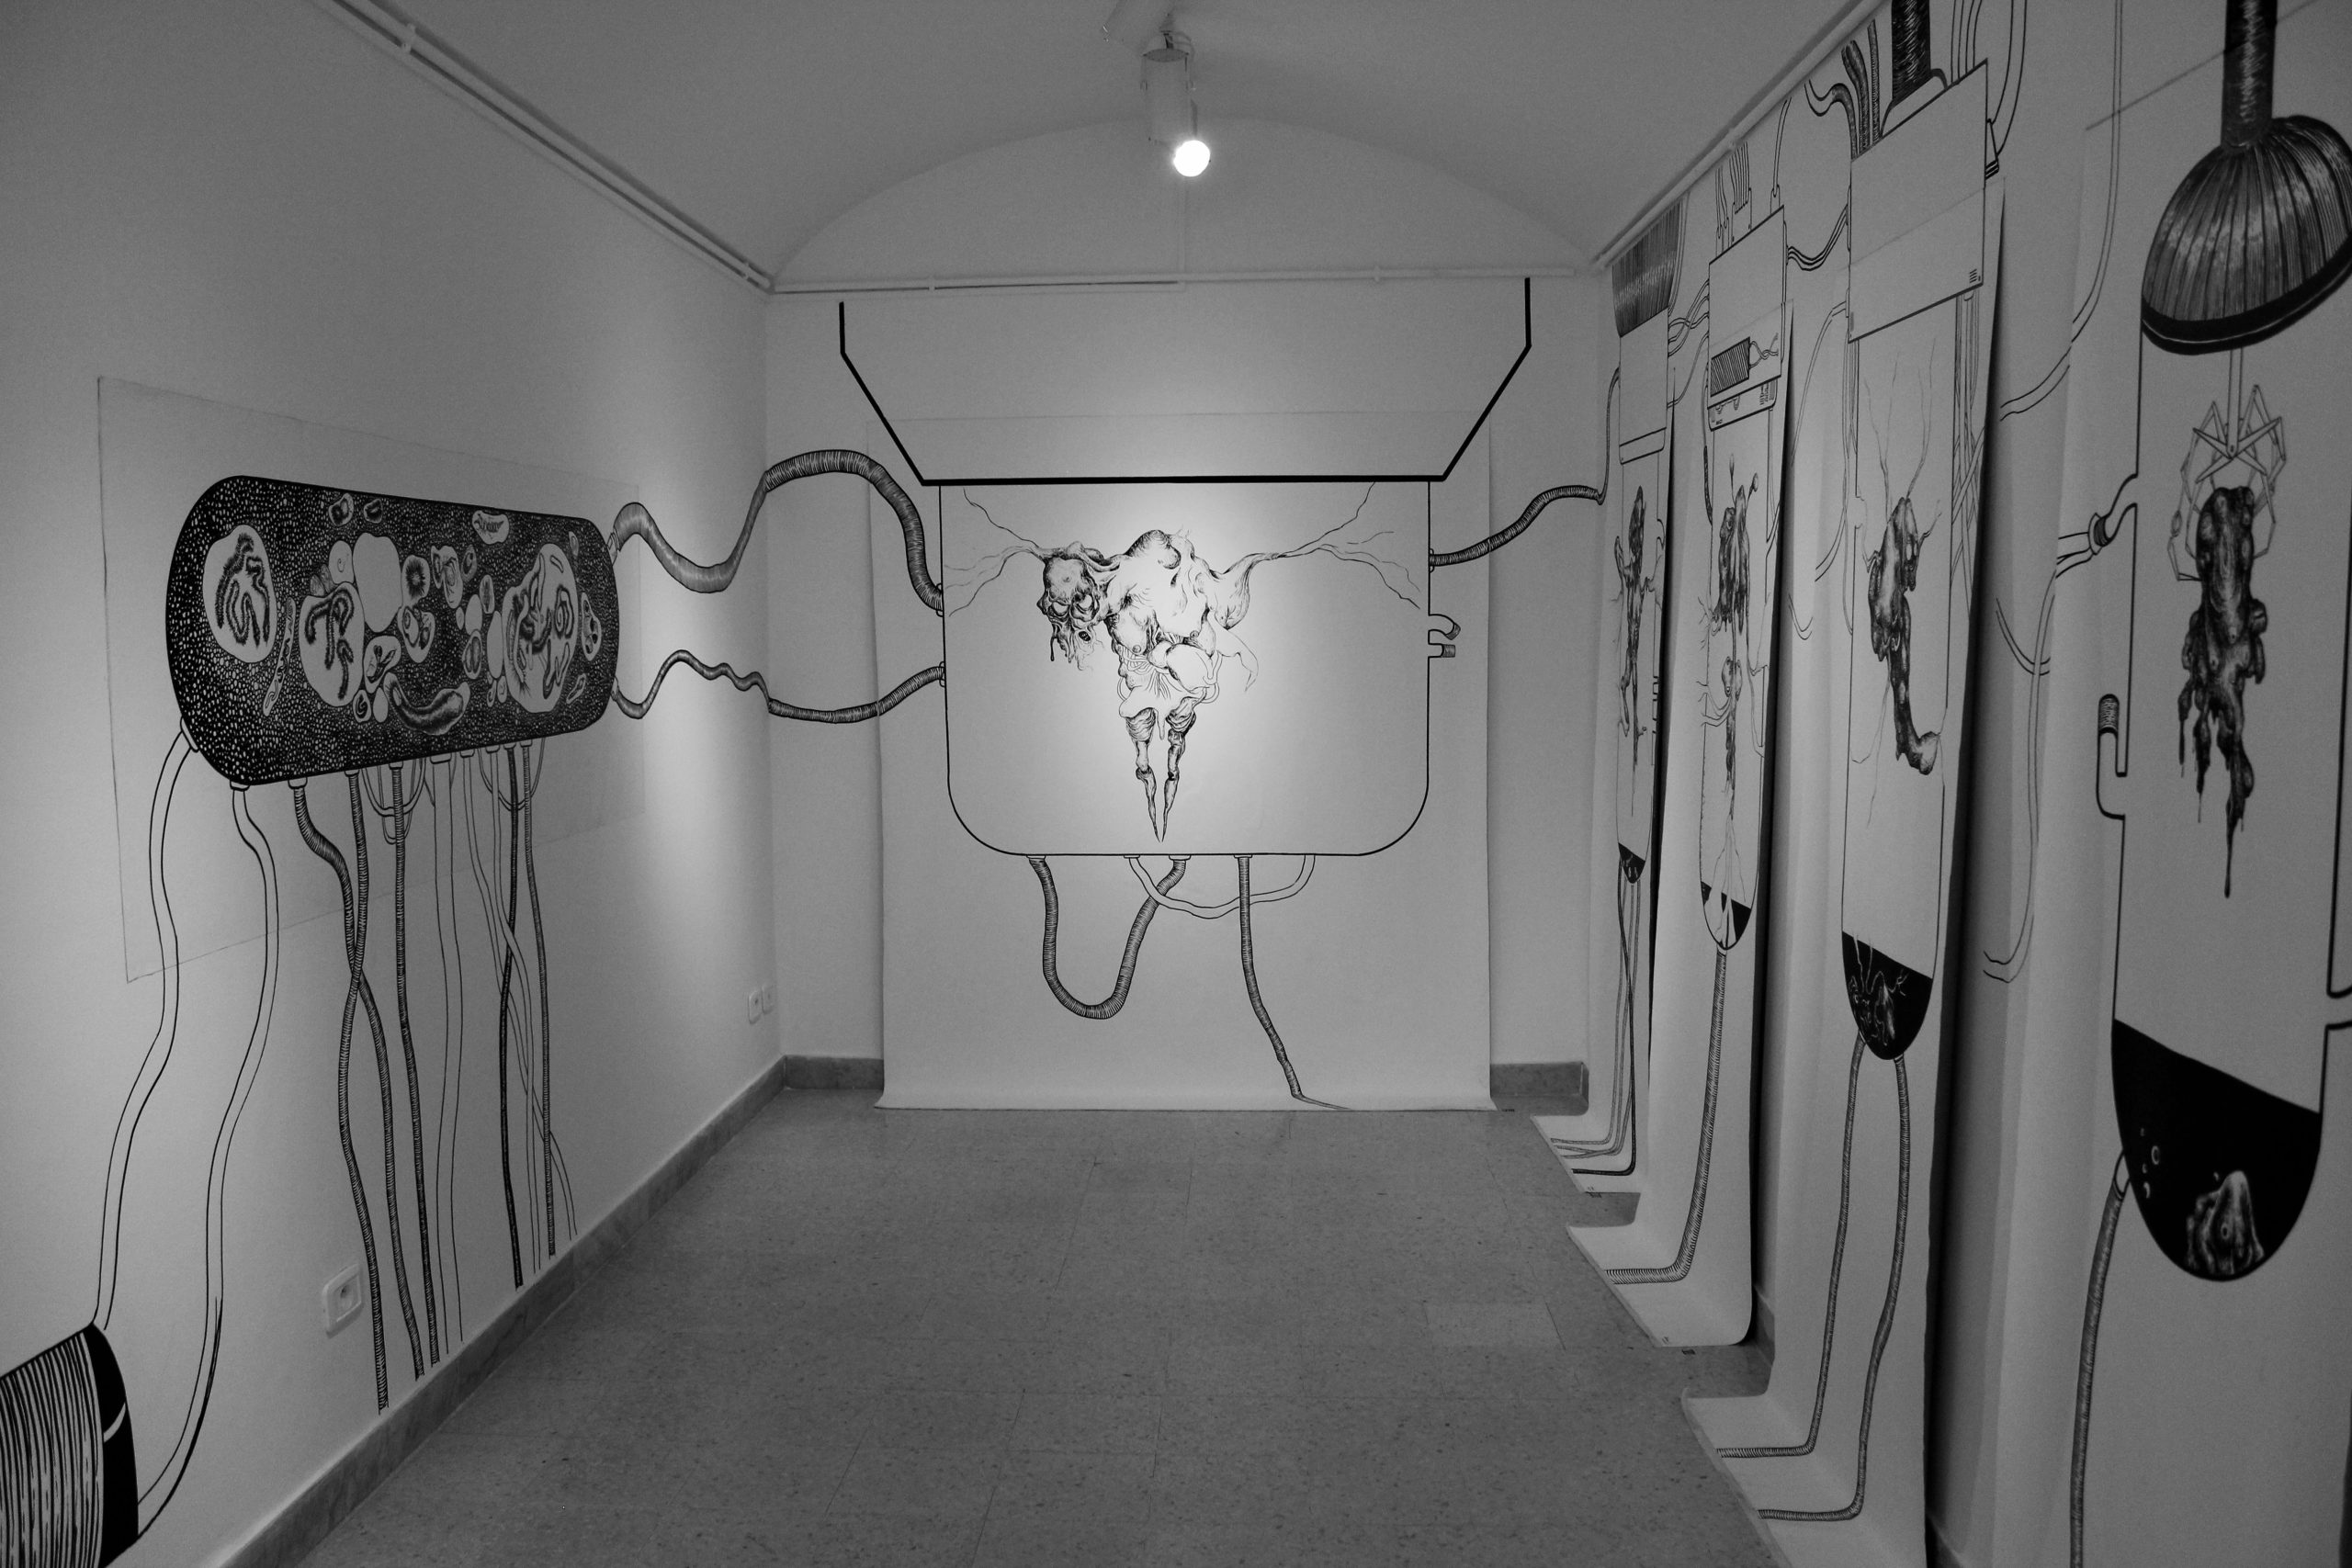 26. Golgotha. Exhibition view. Ink on canvas and walls. A.Gorgi Gallery. 2014. Crédit Intissar Belaid